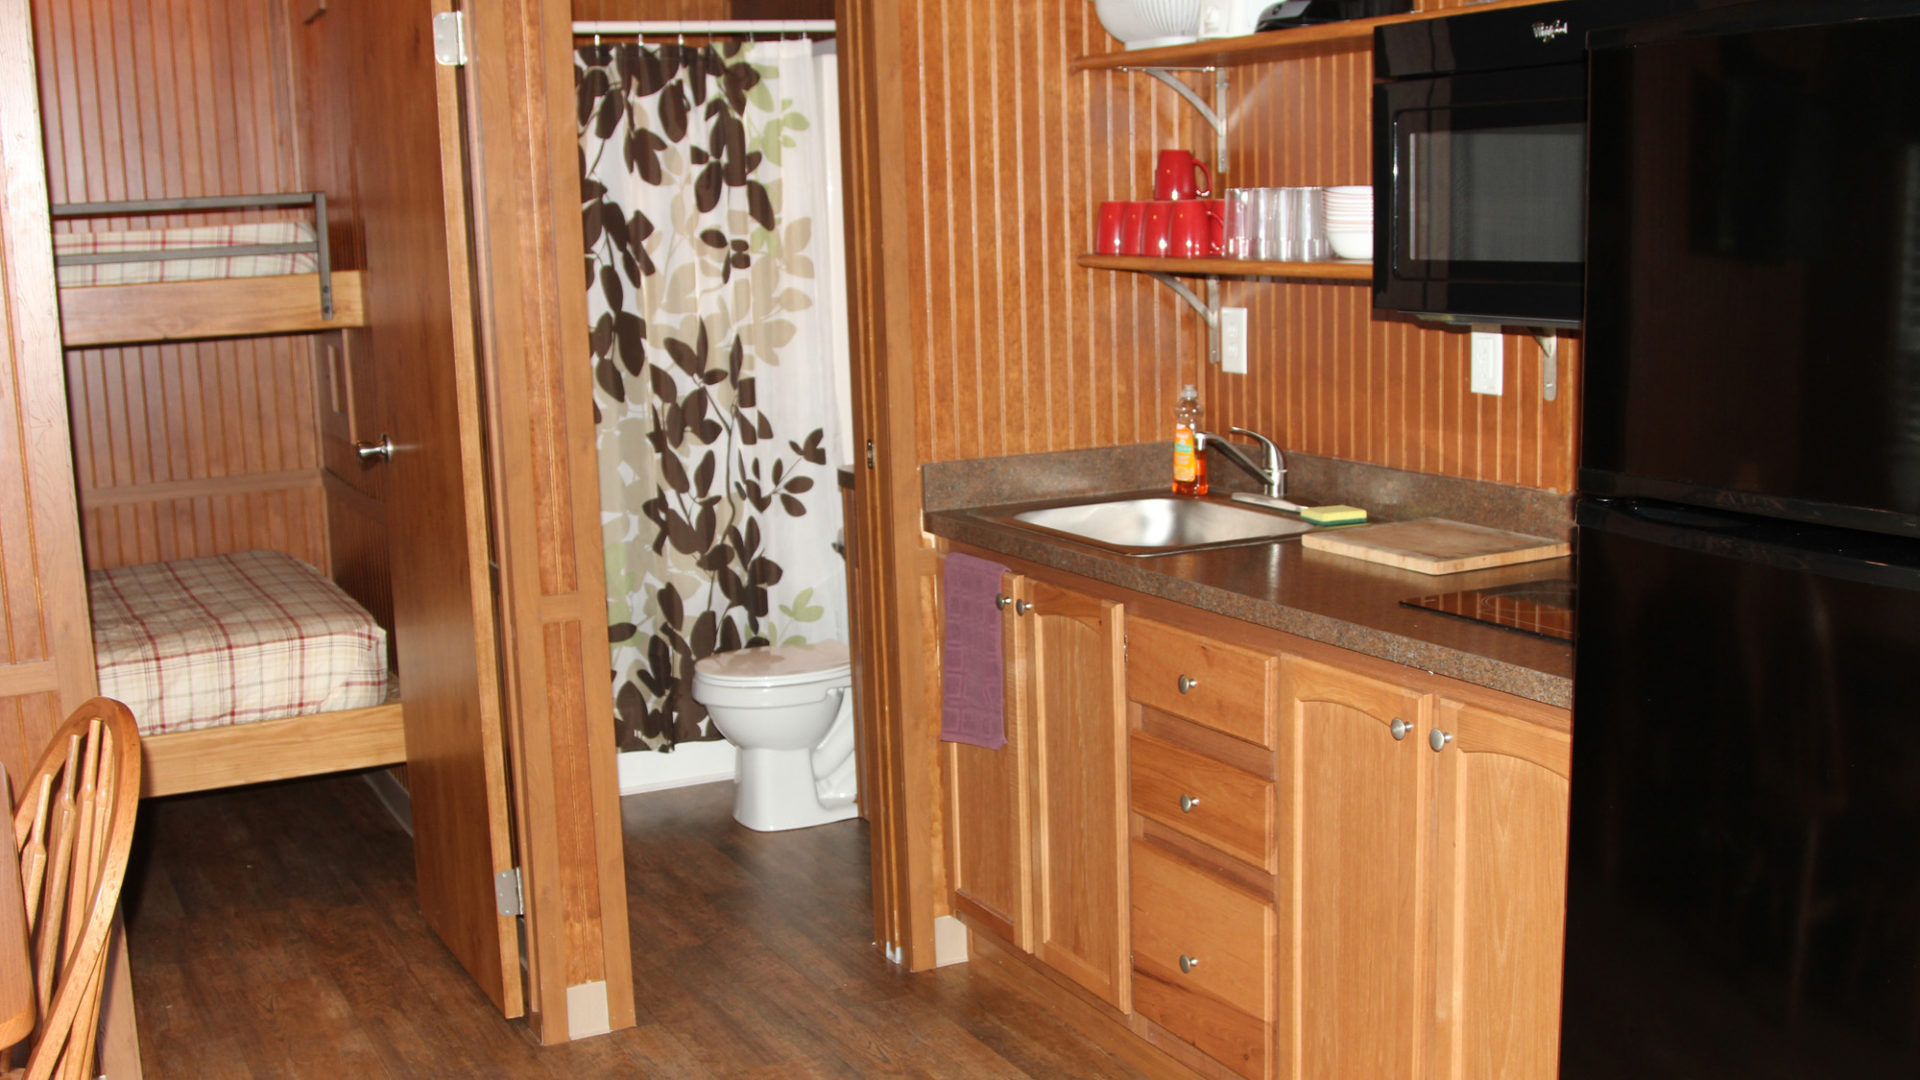 inside amenities included in the deluxe cabin with open floor layout